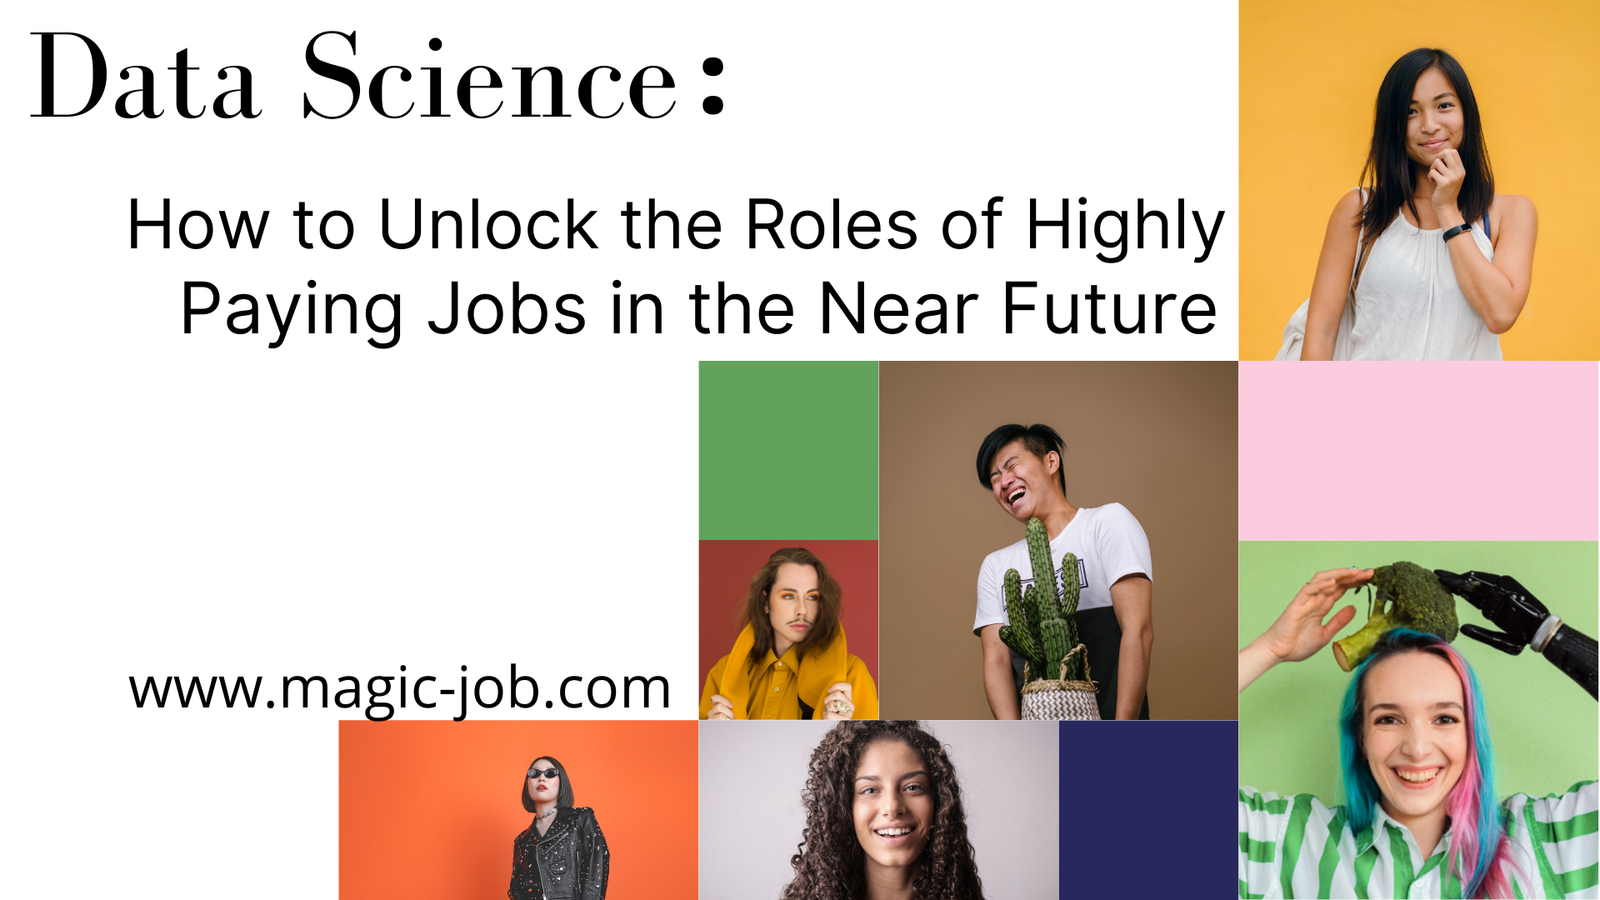 Data Science: How to Unlock the Roles of Highly Paying Jobs in the Near Future image